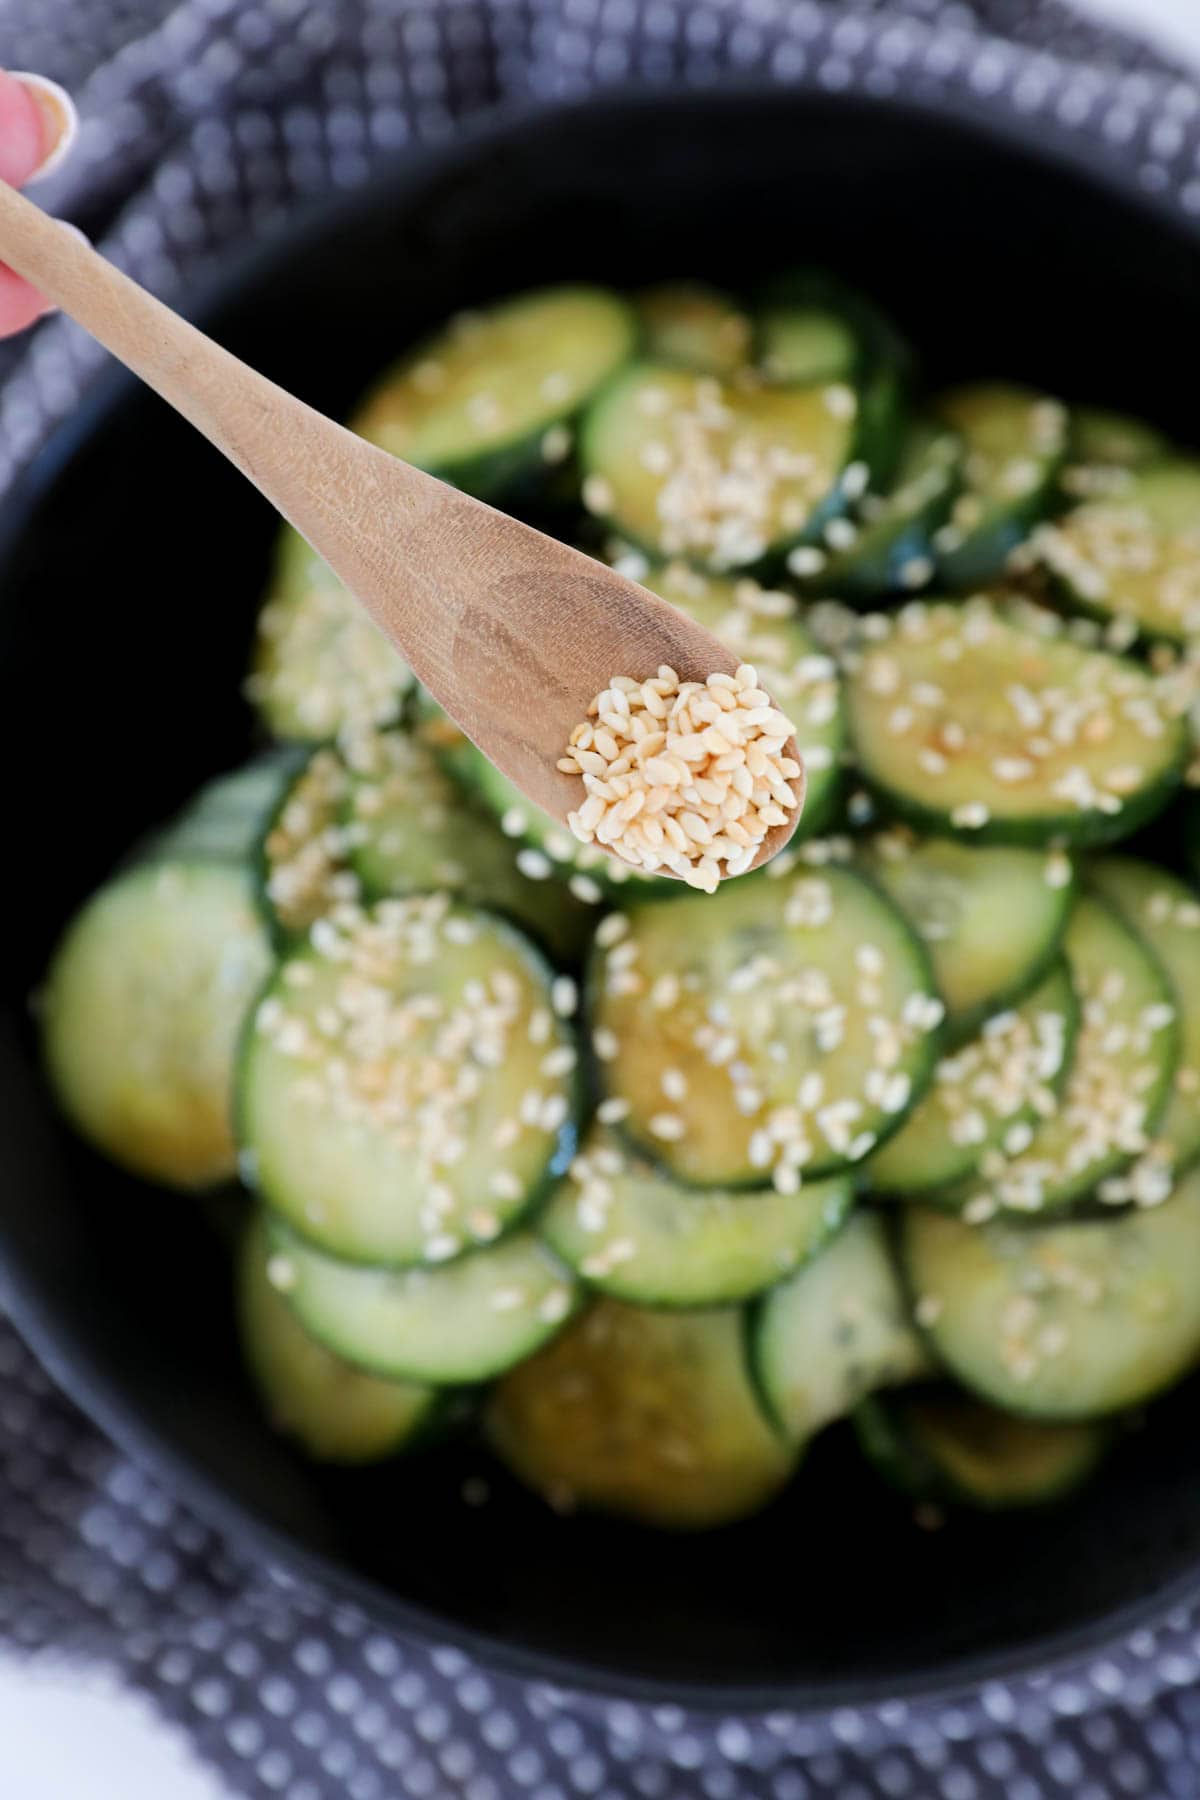 Toasted sesame seeds being sprinkled on sliced cucumbers with a wooden spoon.